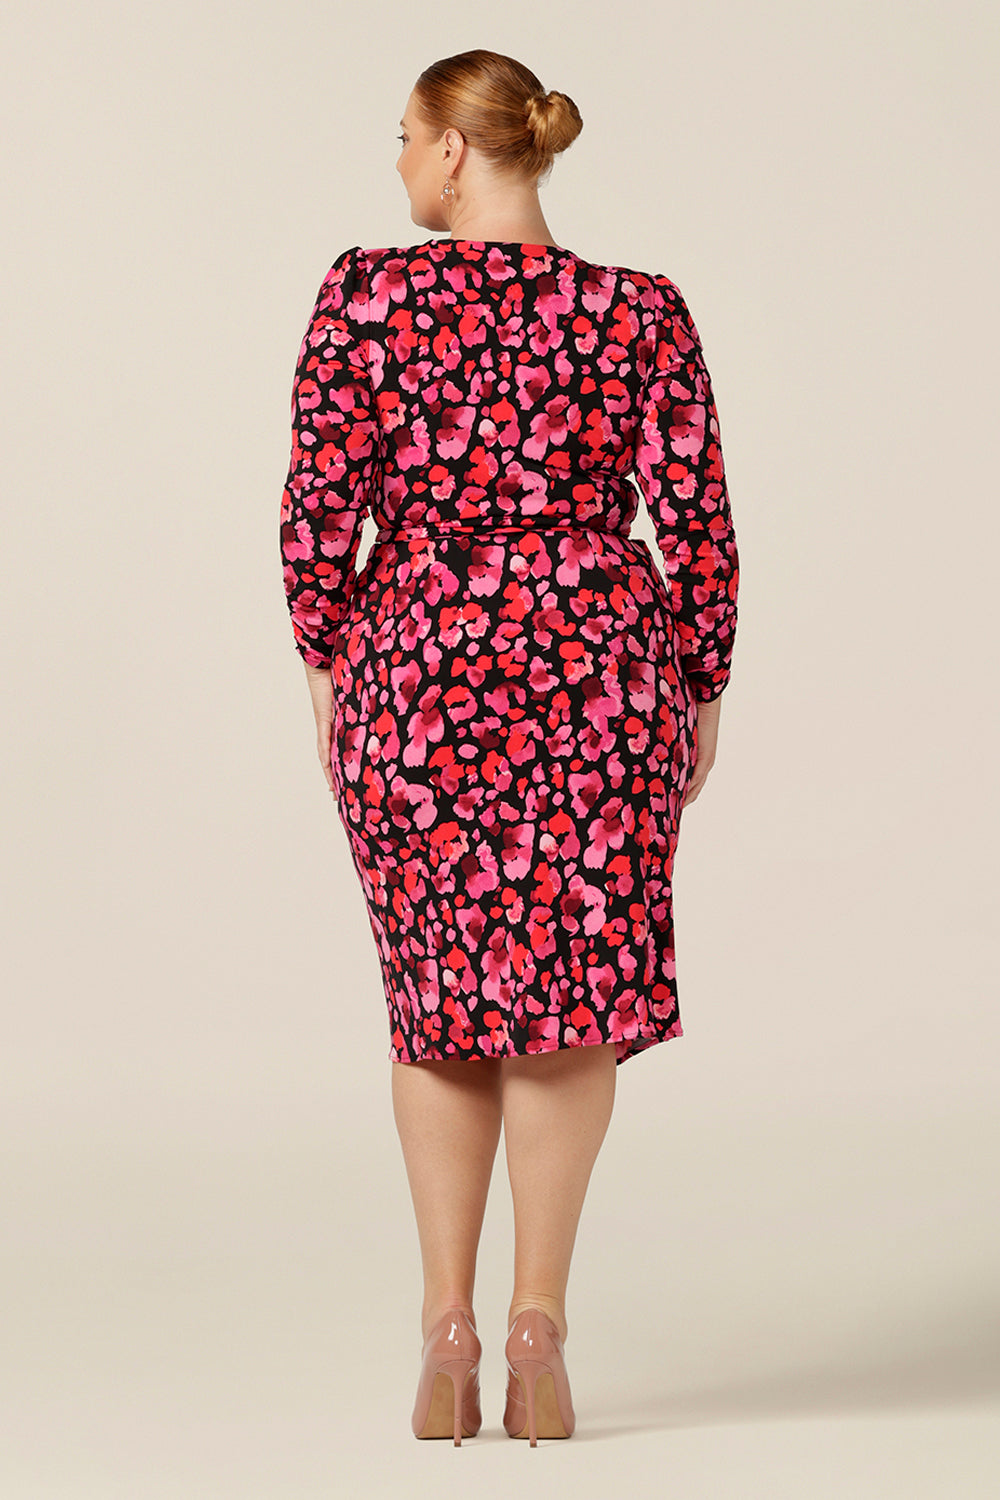 Back view of a  fuller figure, size 18 woman wearing a jersey wrap dress with long sleeves and a tulip skirt. Made in Australia and available to shop online in Australia and New Zealand, this wrap dress features a red floral print on a black base and can be worn for work wear or as an event dress for date night style.